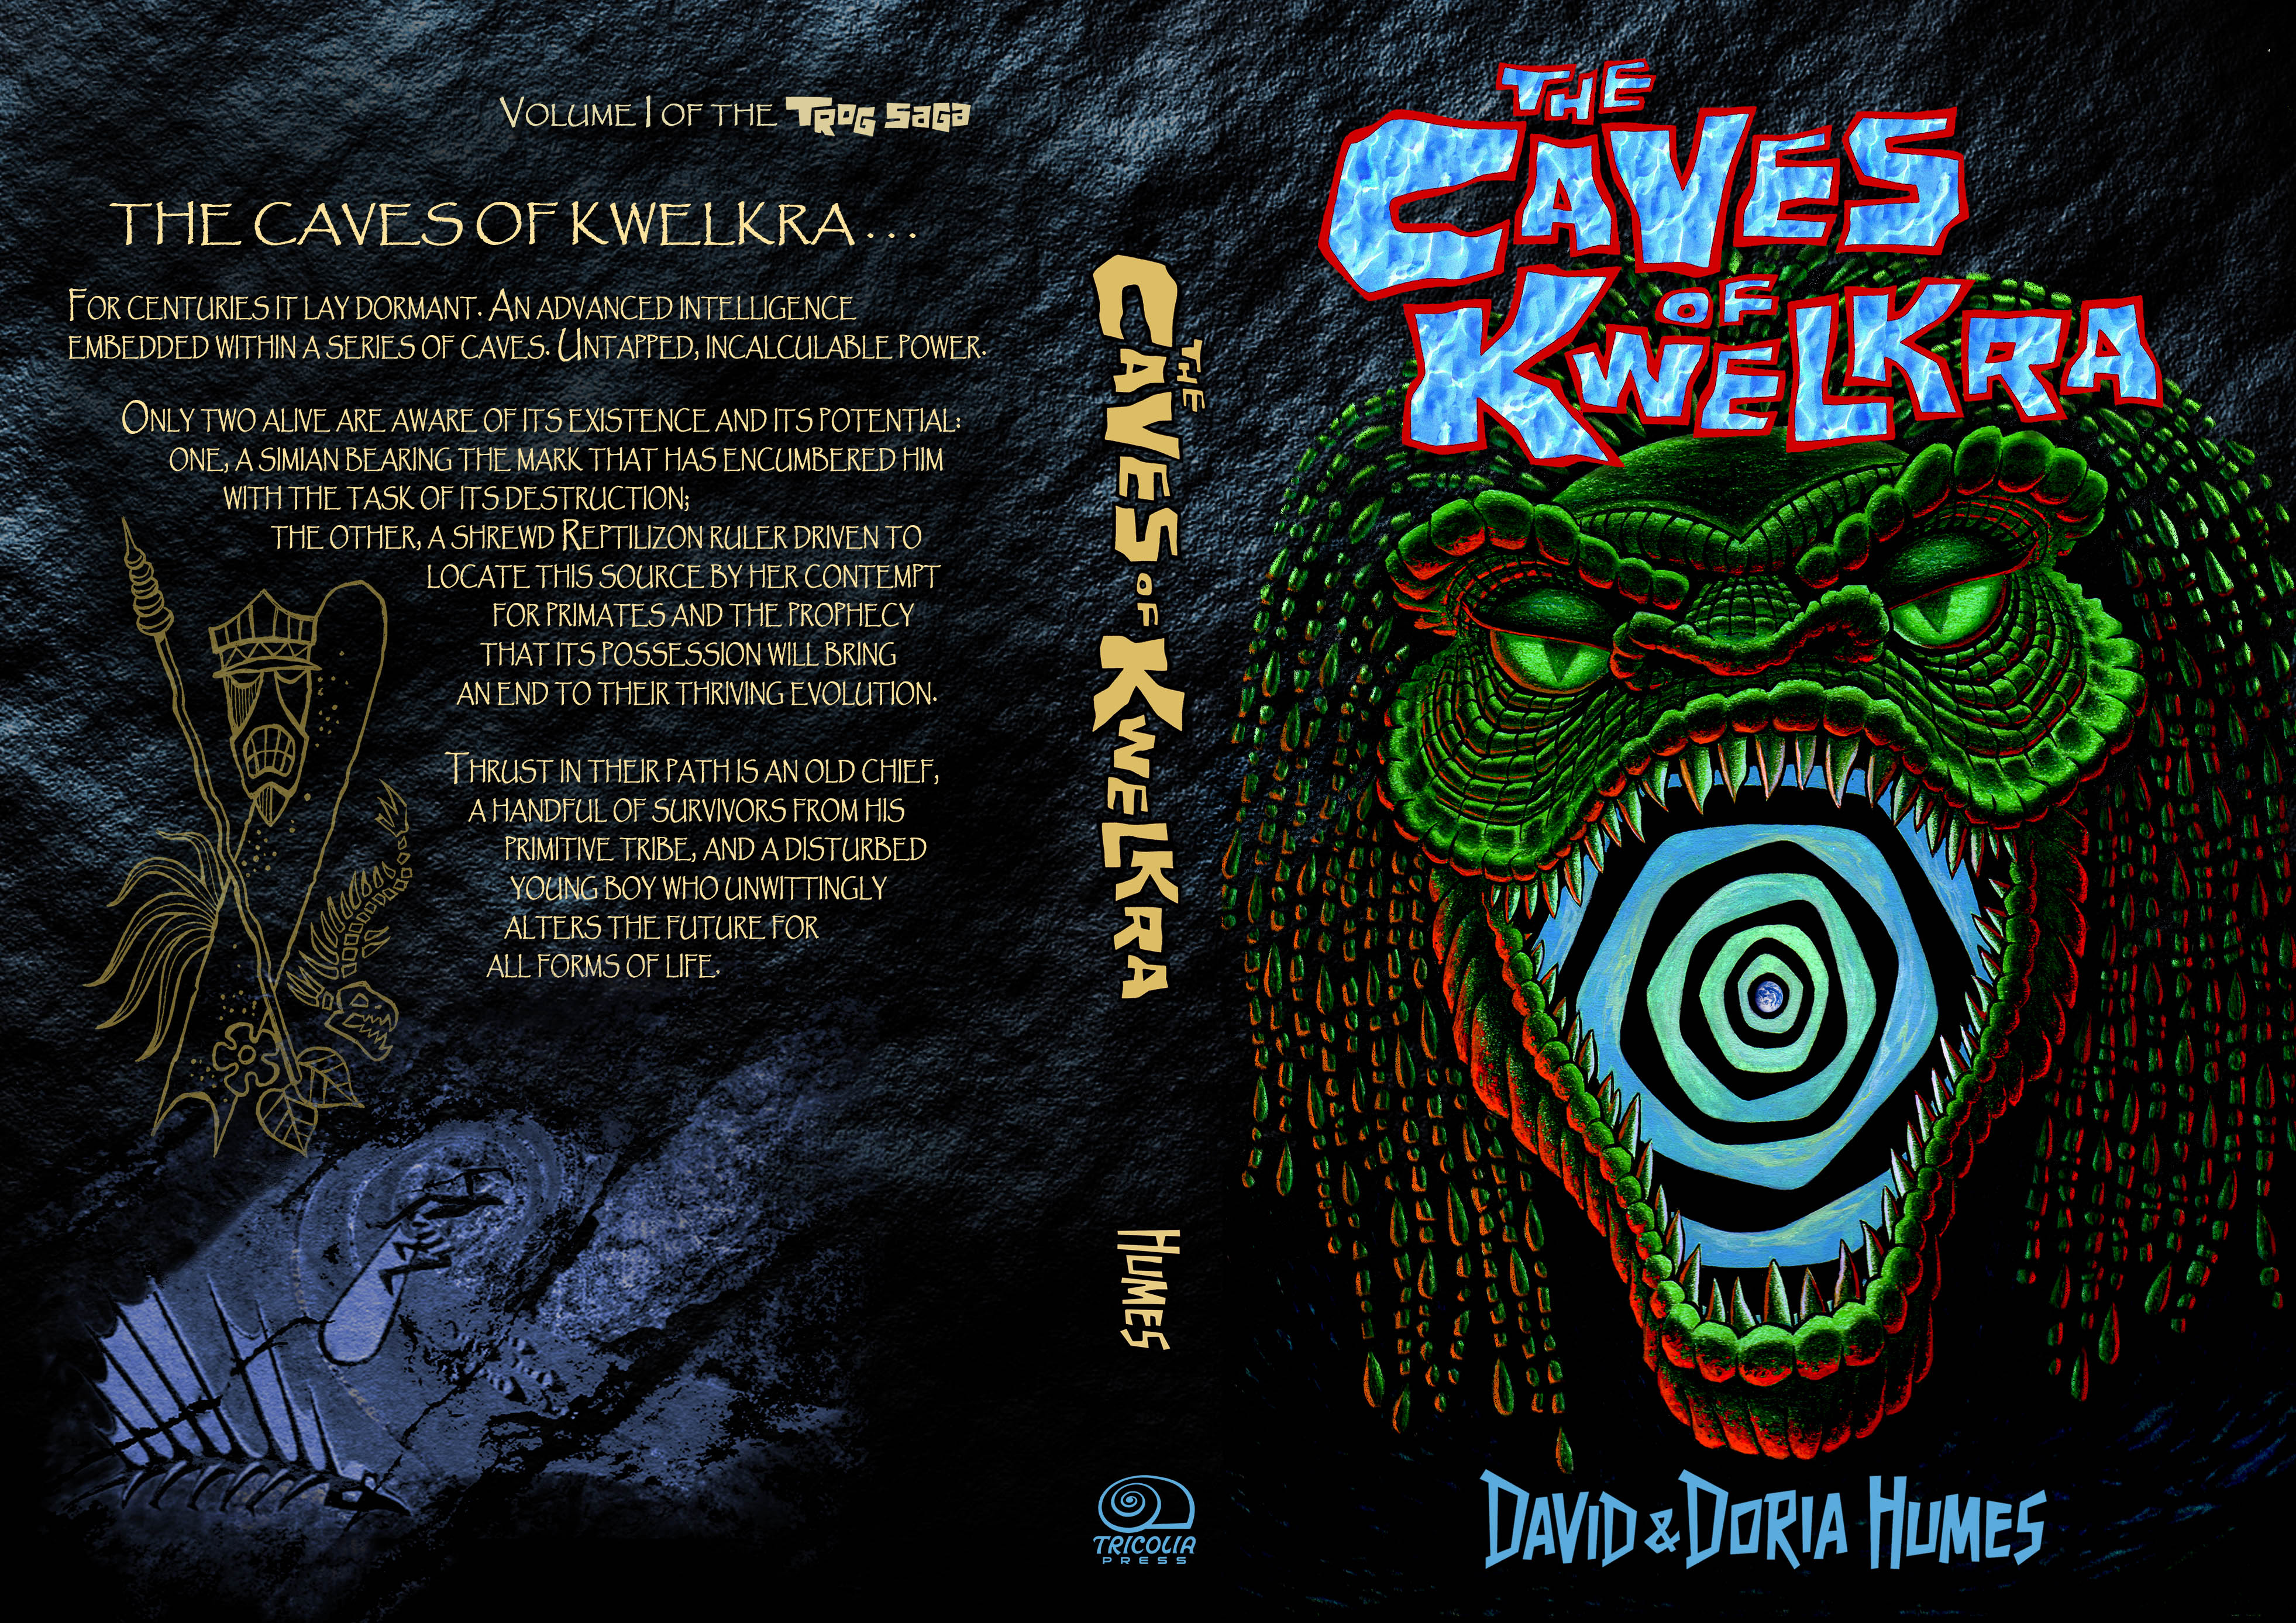 The Caves of Kwelkra